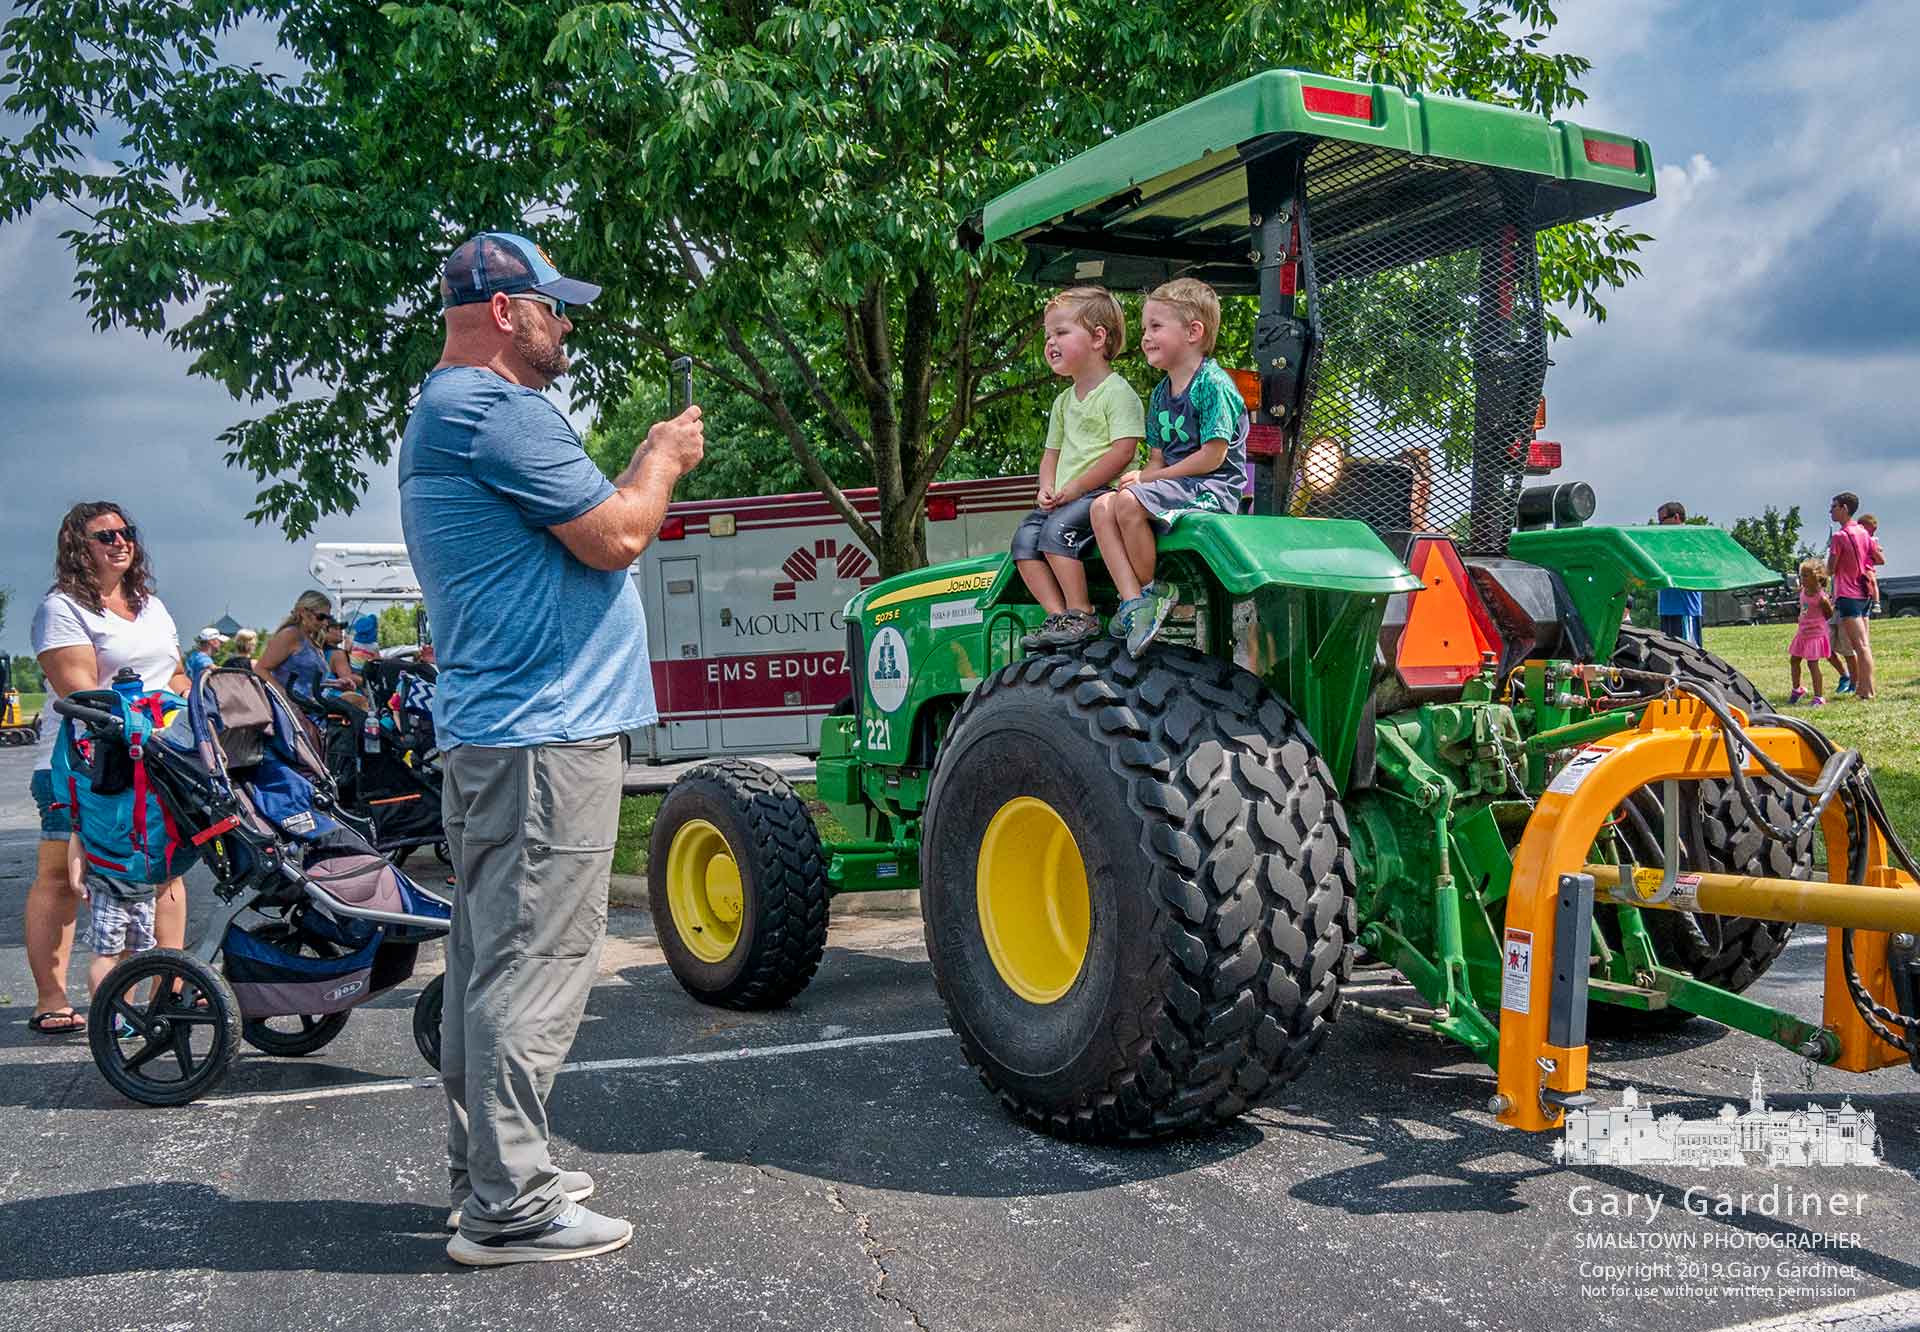 A father photographs his two sons sitting on the rear fender of a Westerville Parks and Recreation tractor during the city's Touch-A-Truck day at the sports fields on Cleveland Ave. My Final Photo for July 19, 2019.